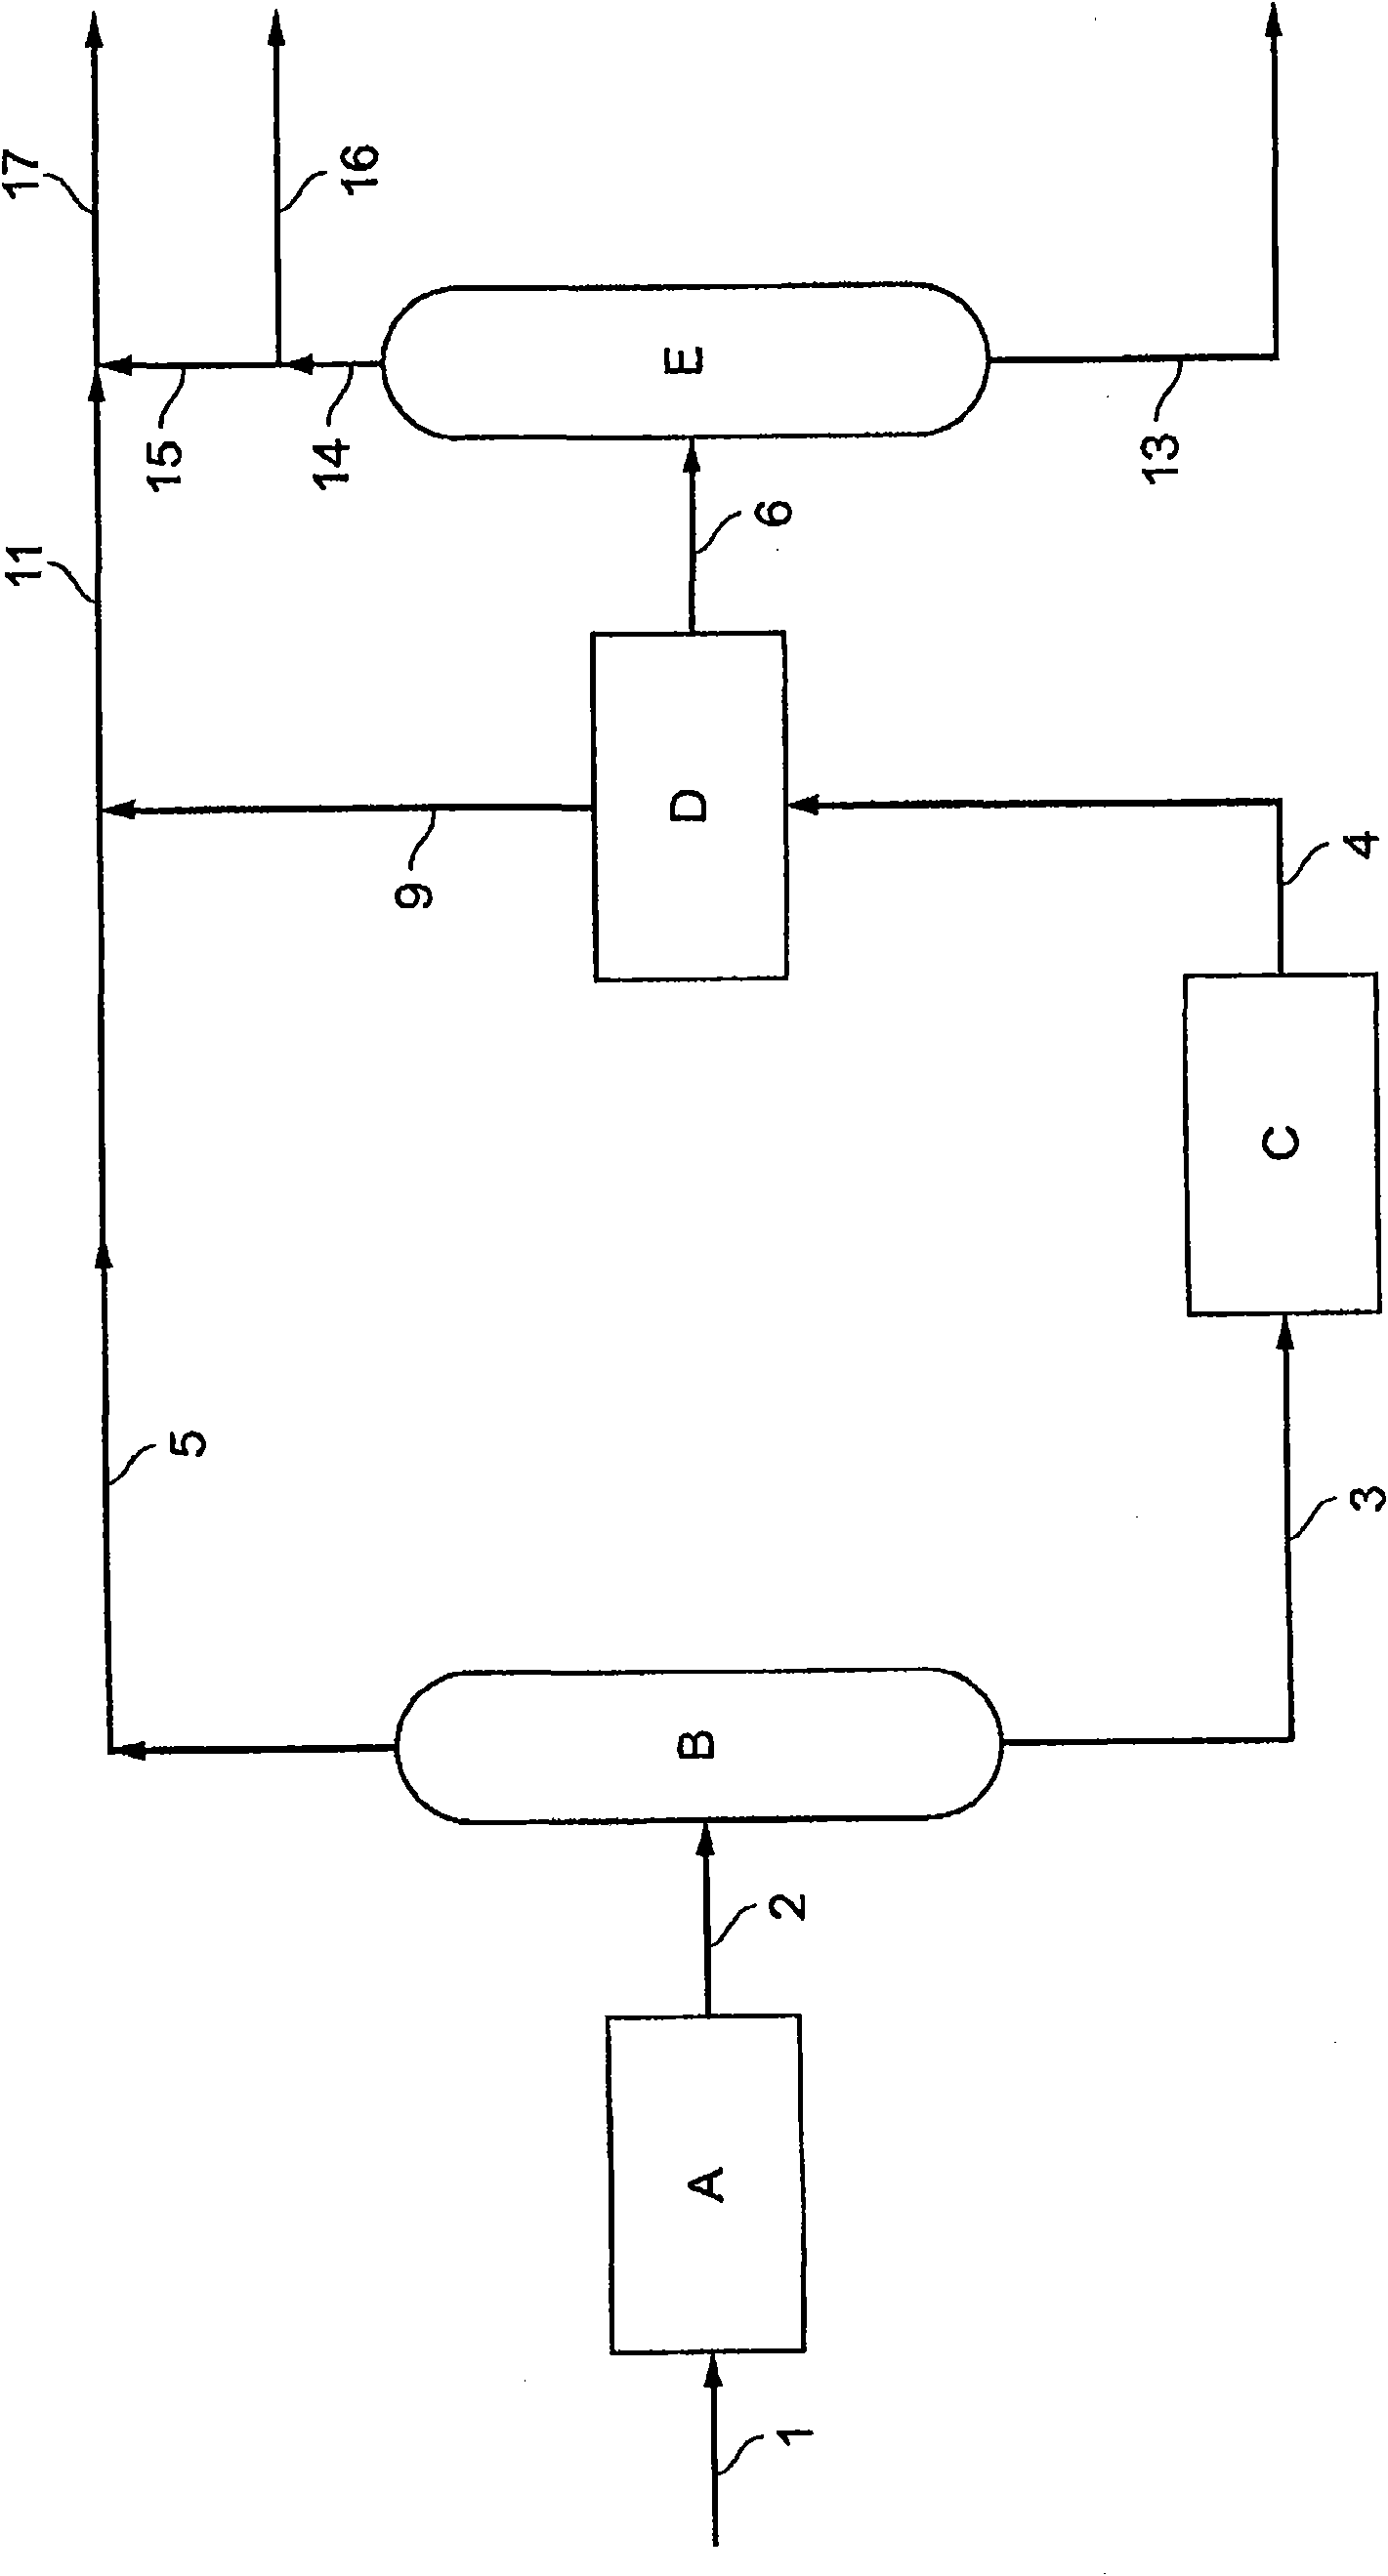 Method for producing a hydrocarbon cut with a high octane level and low sulphur content